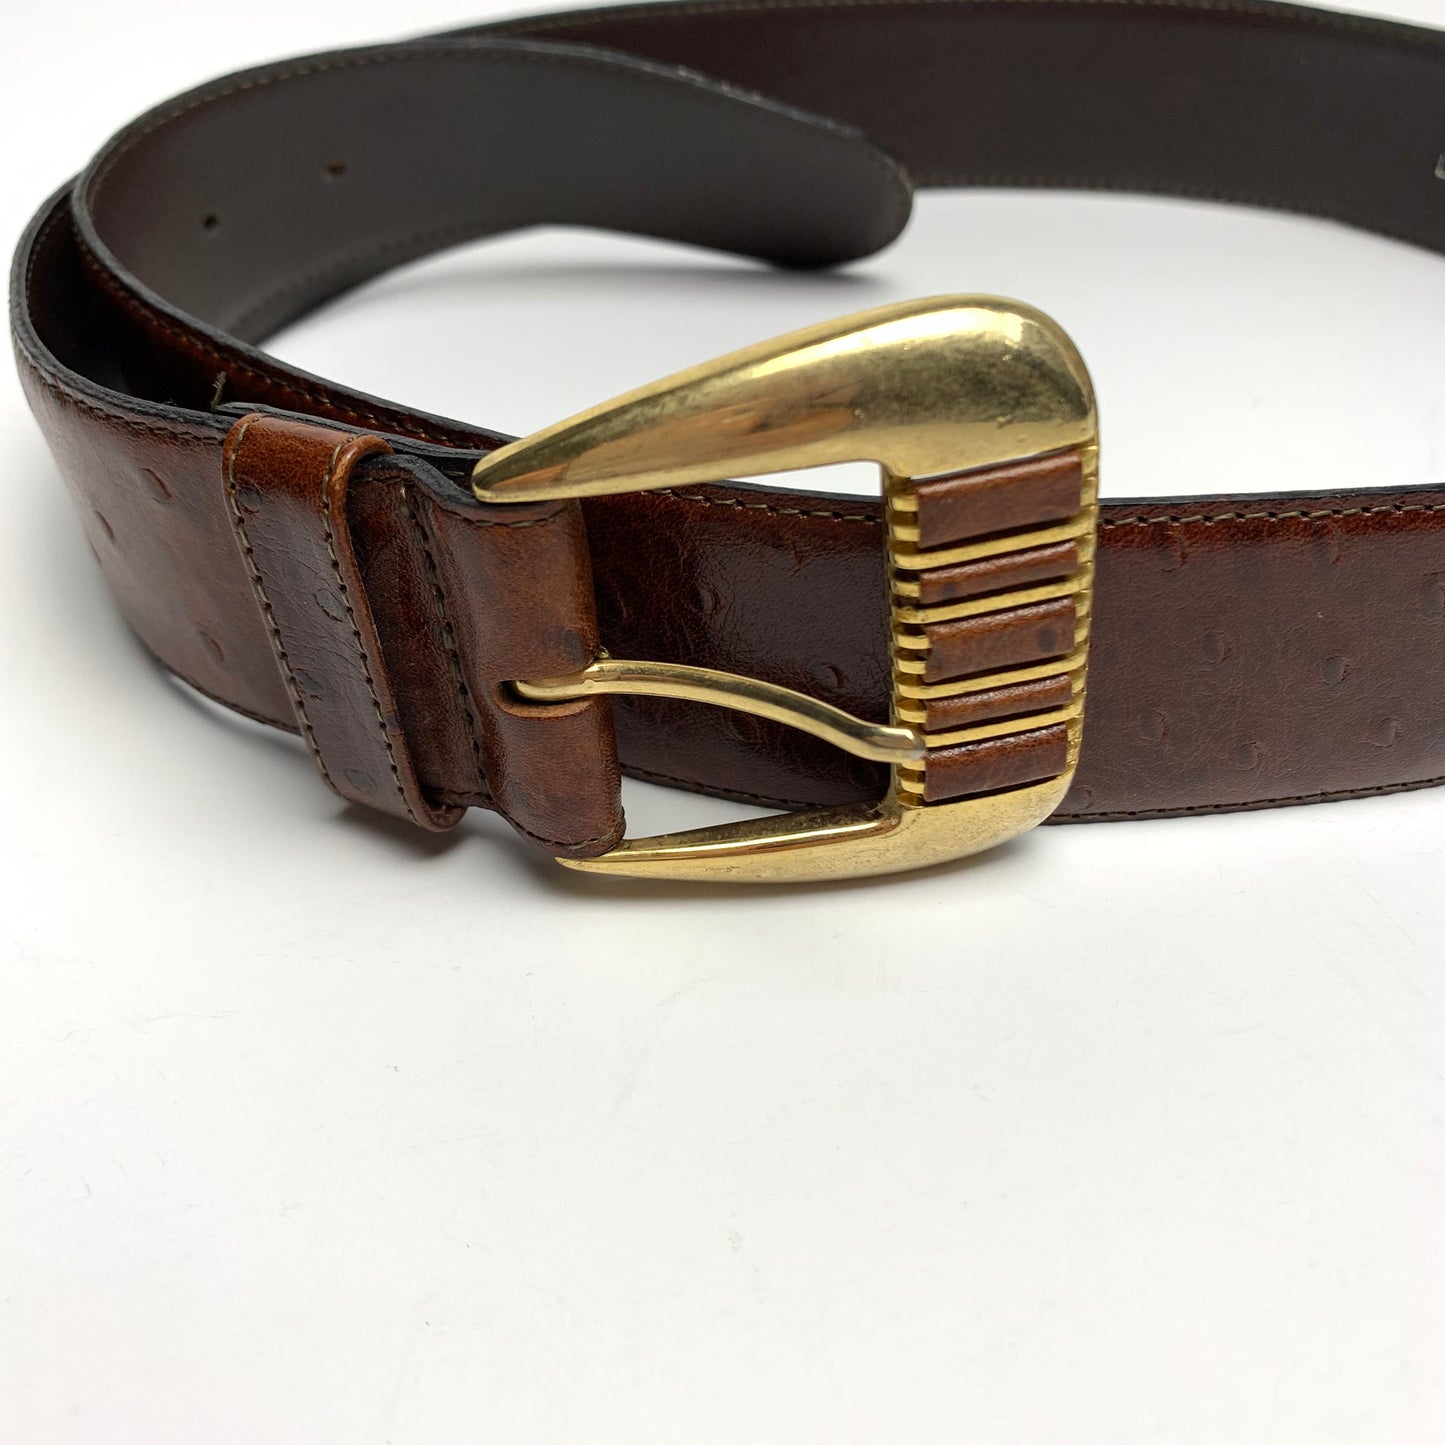 Vintage 90s Lemie Leather Belt with Gold Buckle Mock Croc Leather Made in Italy